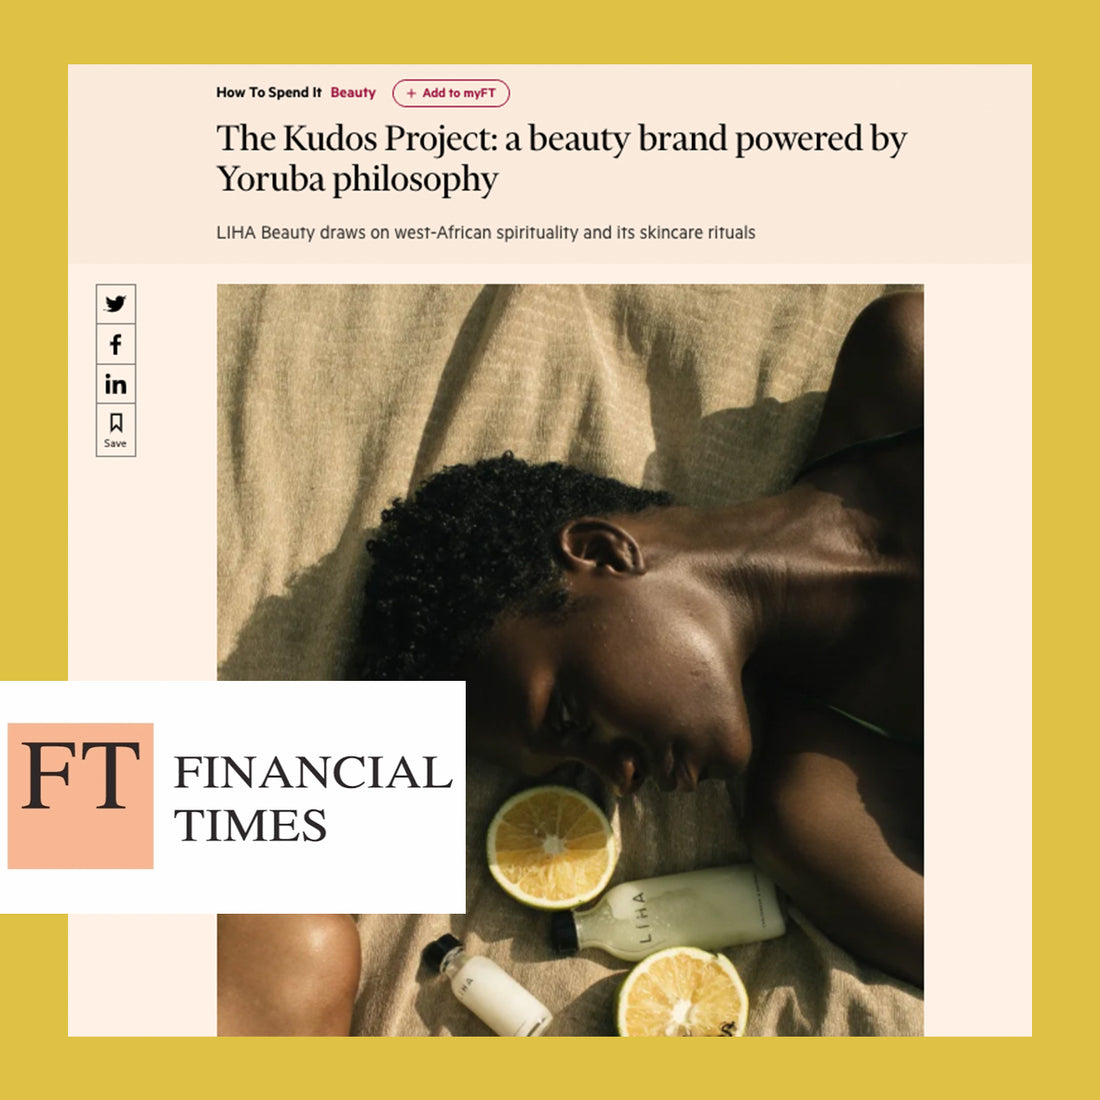 FINANCIAL TIMES: The Kudos Project A Beauty Brand Powered By Yoruba Philosophy